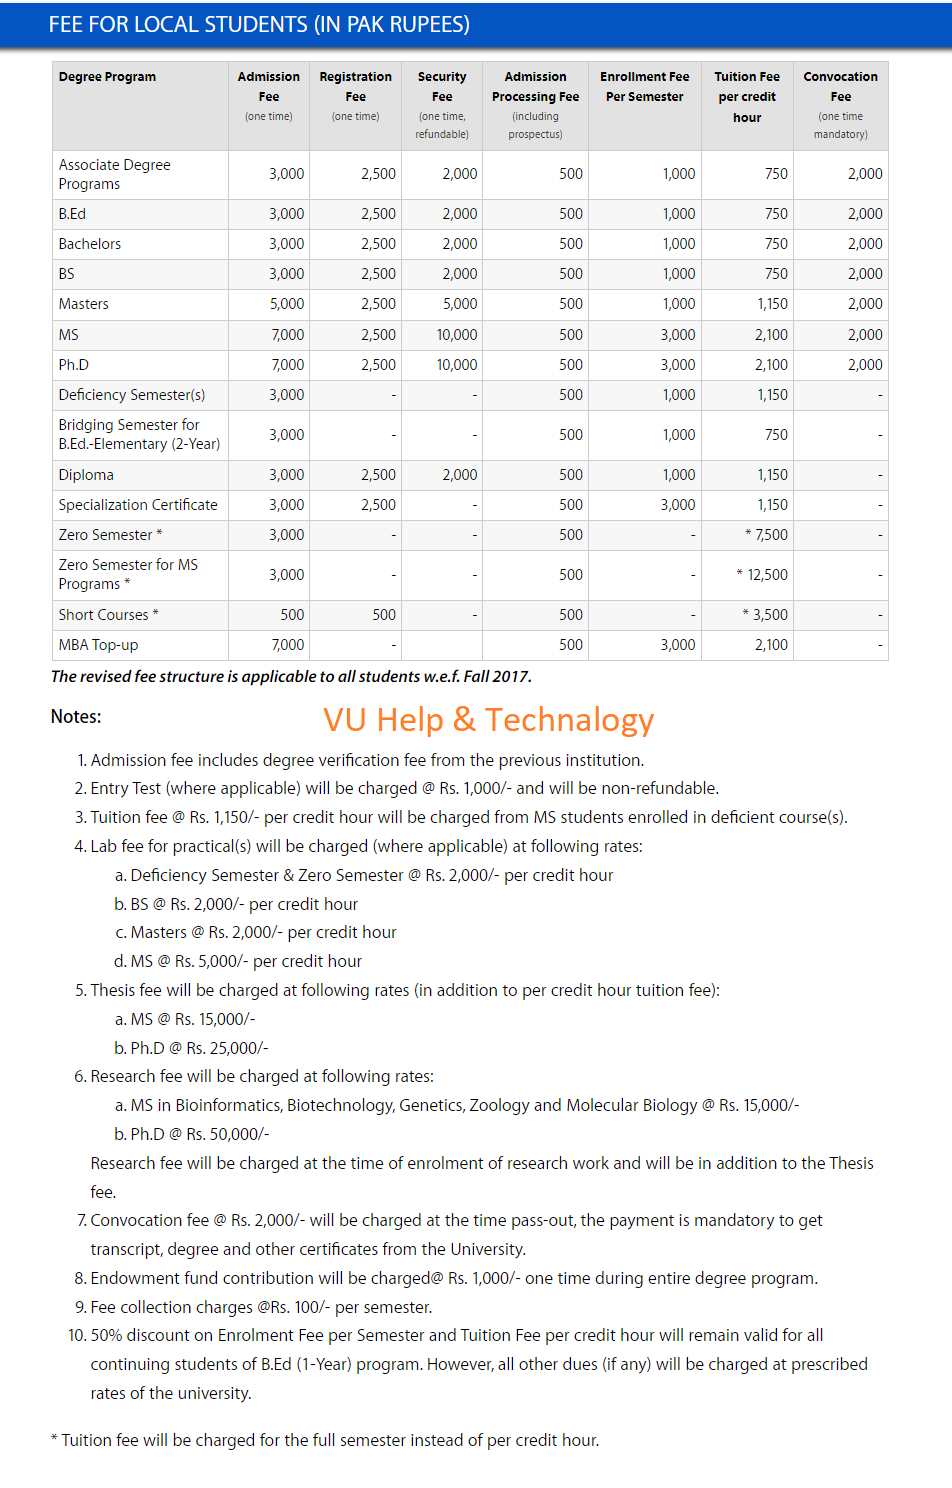 Virtual University Admission 2022 Fee Structure: